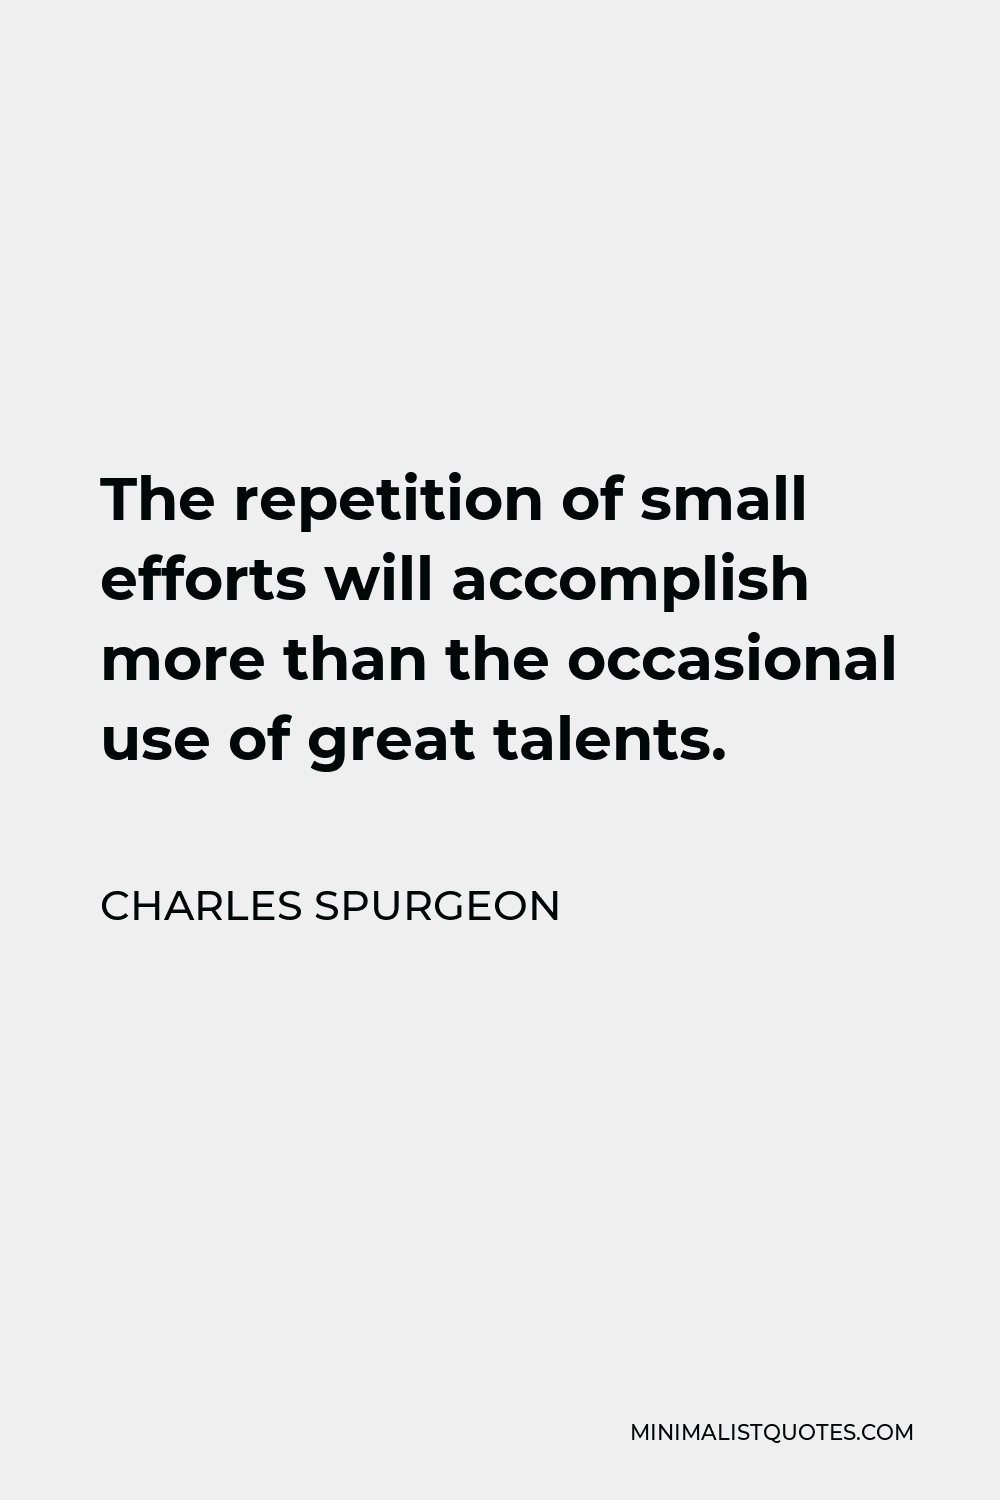 Charles Spurgeon Quote - The repetition of small efforts will accomplish more than the occasional use of great talents.